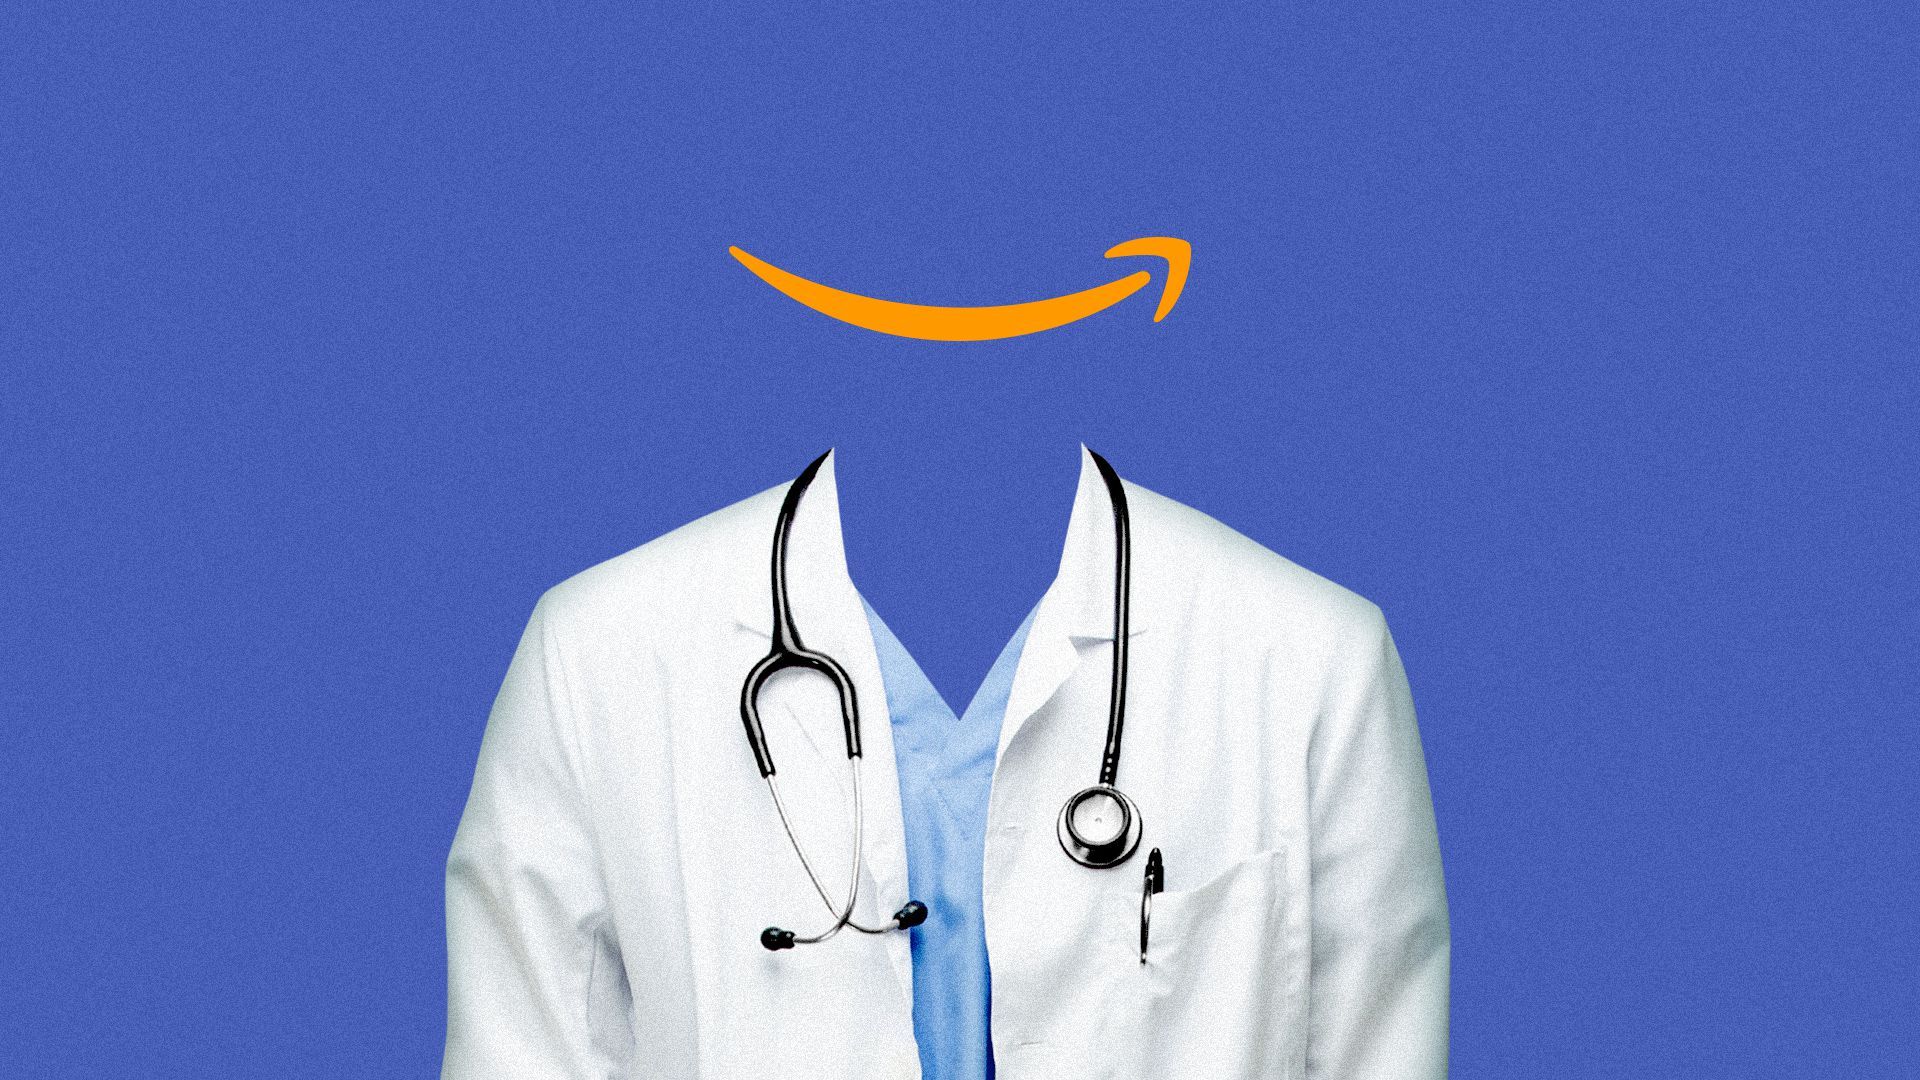 Illustration of an empty doctor's outfit with the Amazon smile logo as the face. 